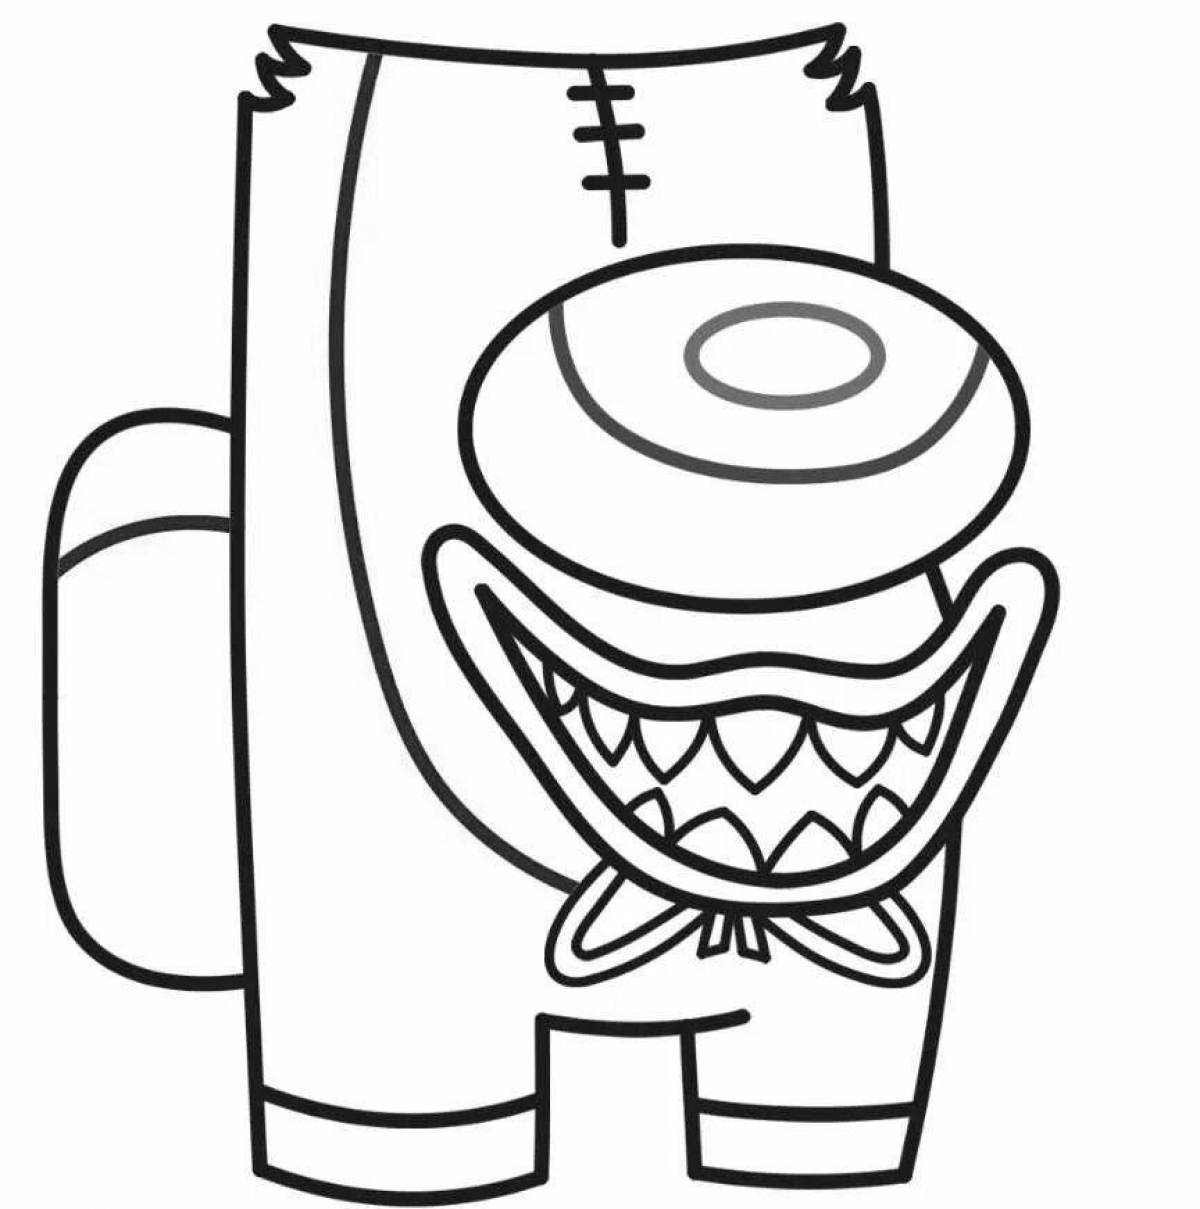 Grinning huggy coloring book